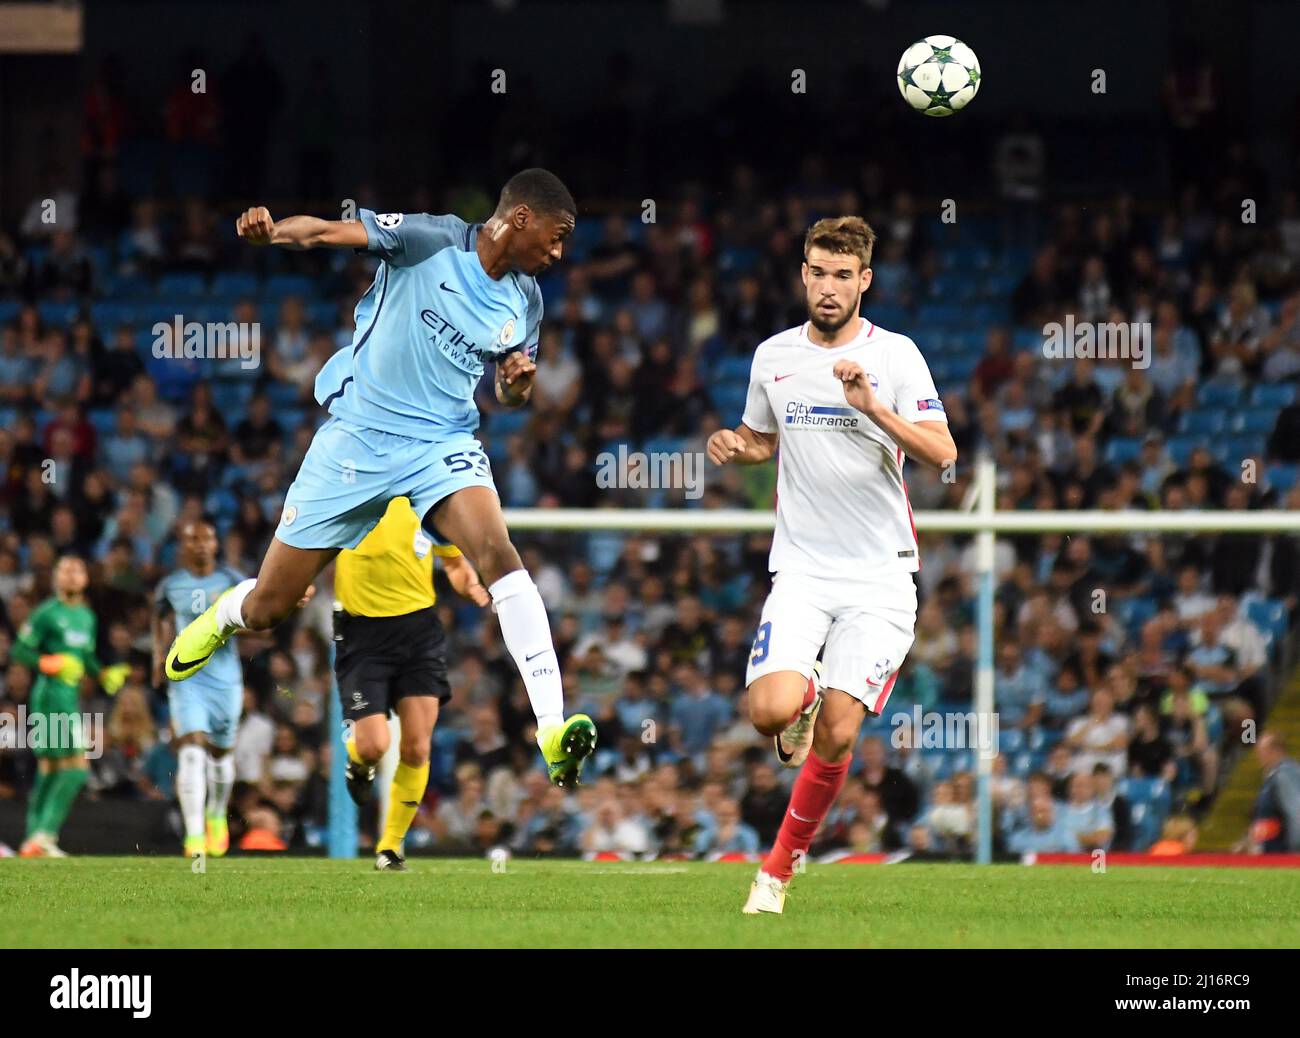 MANCHESTER, ENGLAND - AUGUST 24, 2016: pictured during the second leg of the 2016/17 UEFA Champions League tie between Manchester City (Engalnd) and FCSB (Romania) at Etihad Stadium. Copyright: Cosmin Iftode/Picstaff Stock Photo